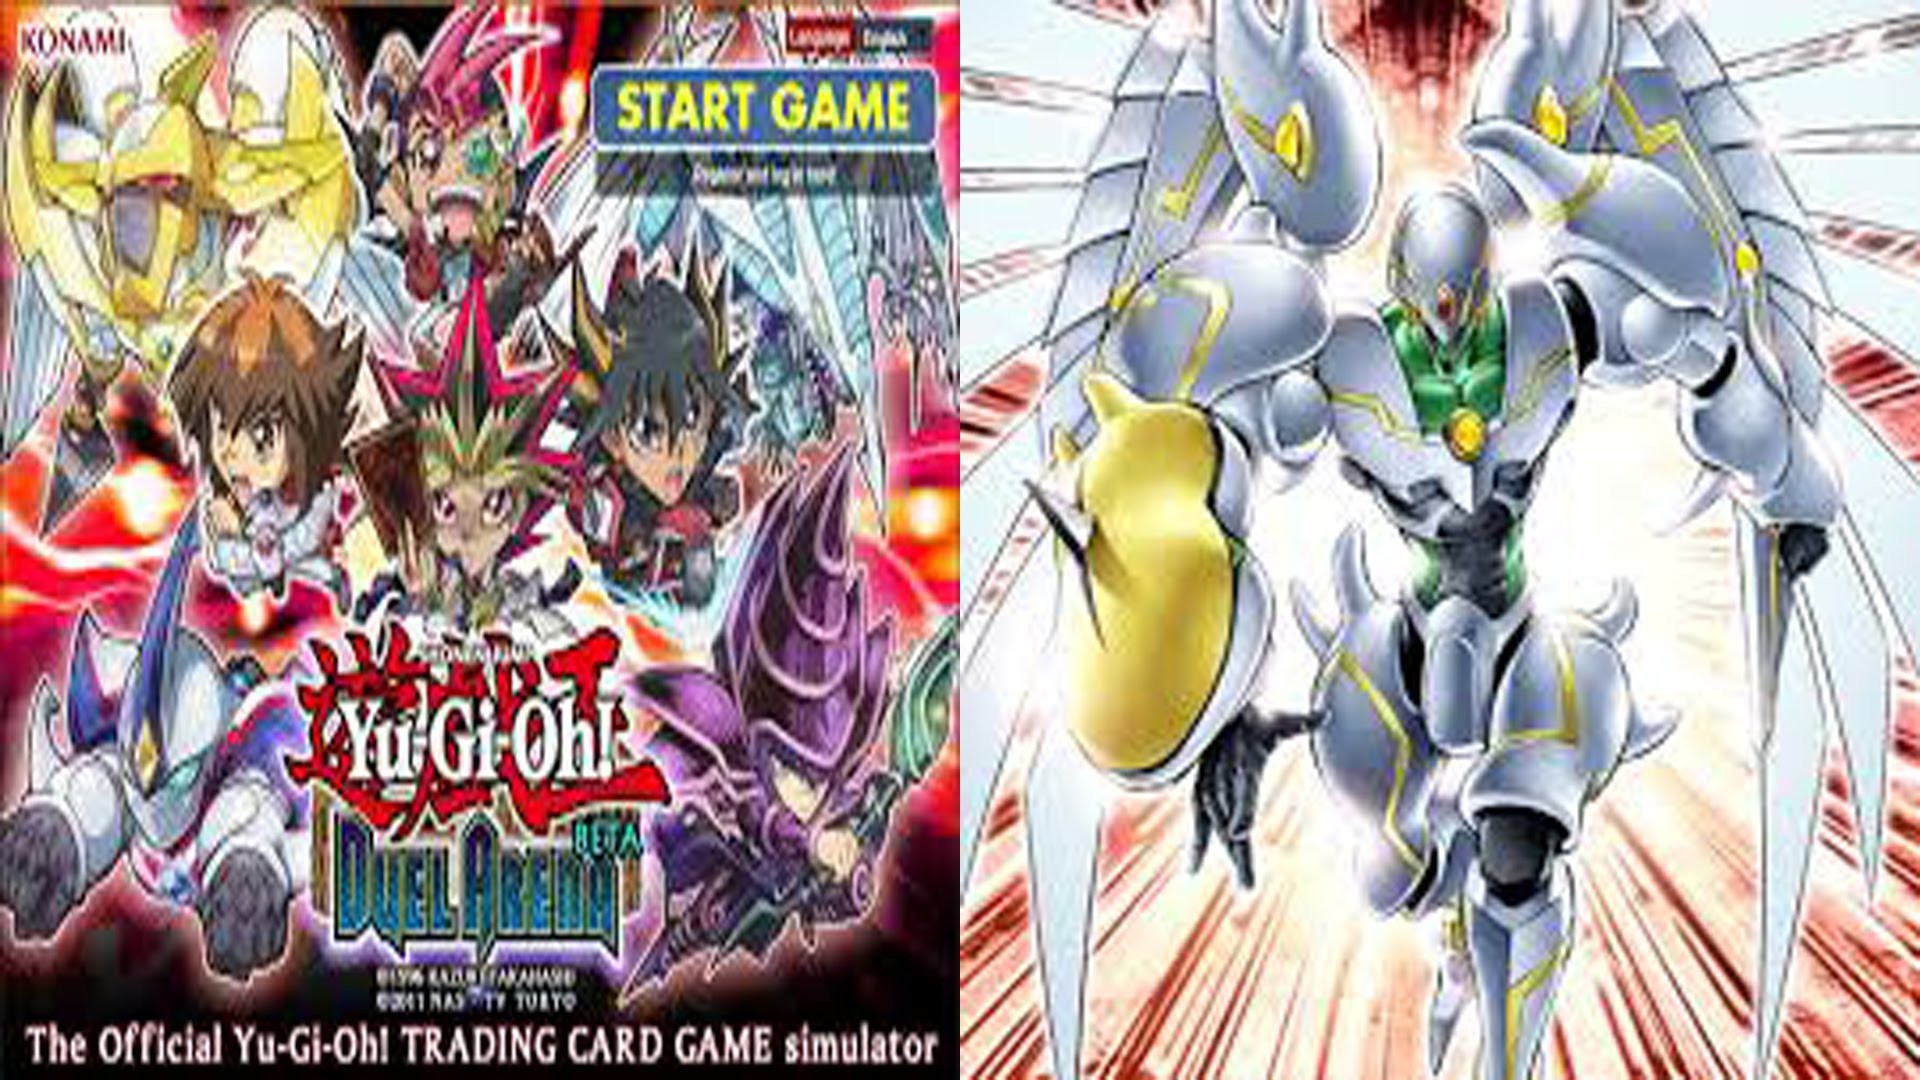 1920x1080 Yu-Gi-Oh Duel Arena - Single Player Quest Mode Stage 8-3 Vs Elemental Hero  Shining Flare Wingman - YouTube